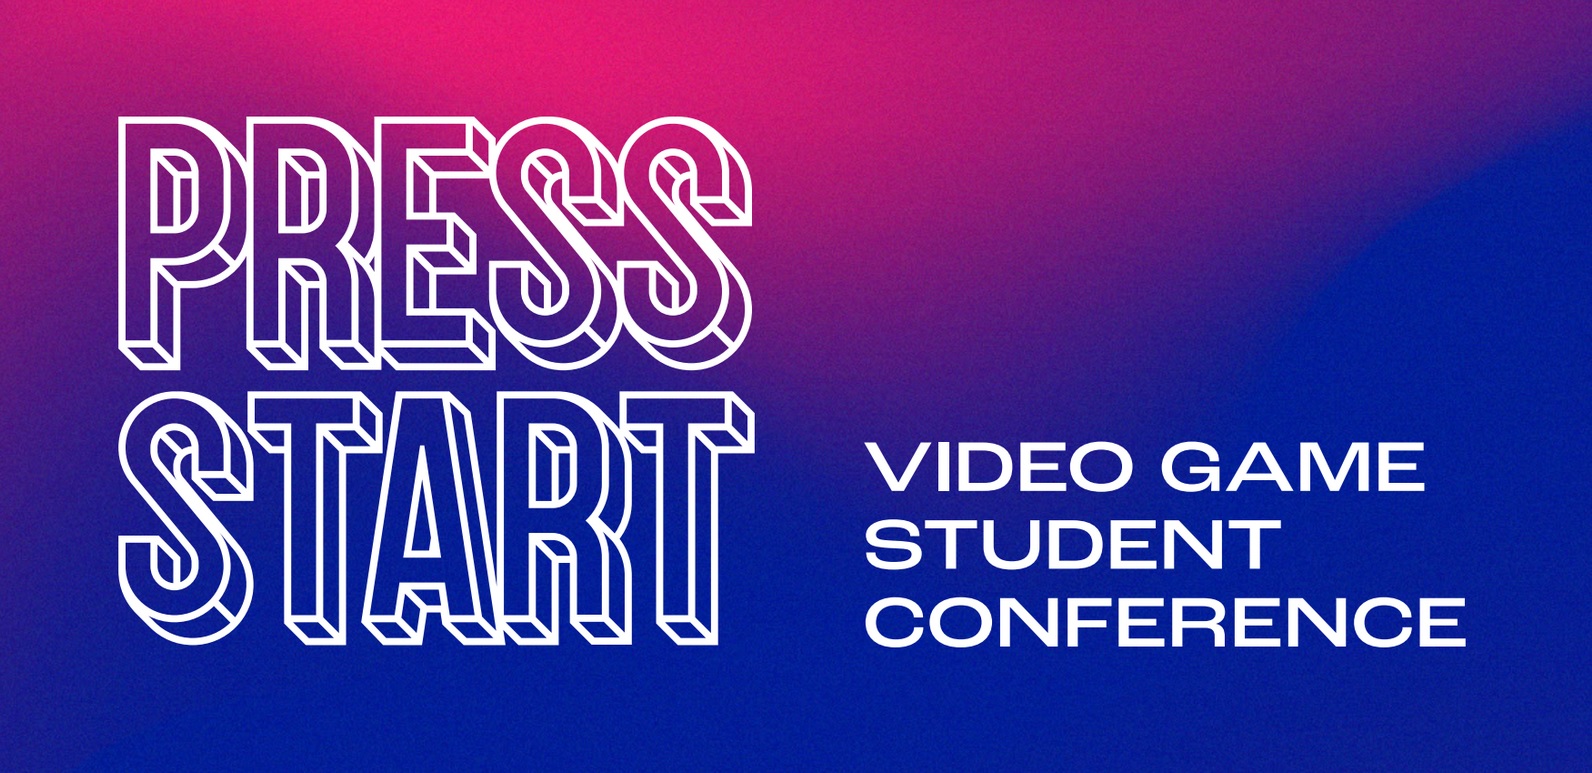 Video Game Student Conference